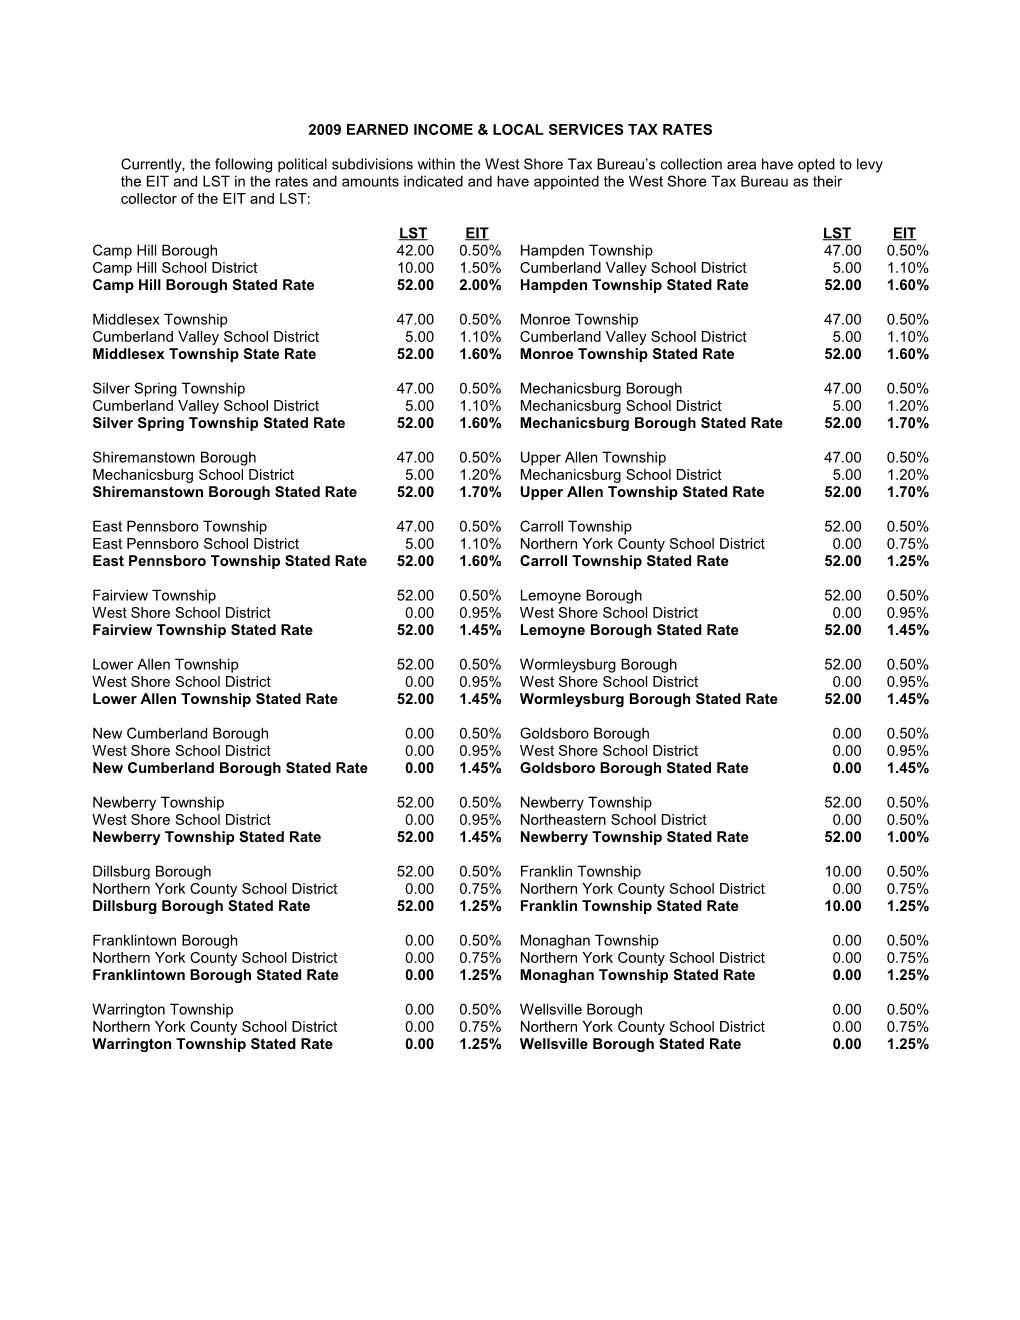 2009 Earned Income & Local Services Tax Rates